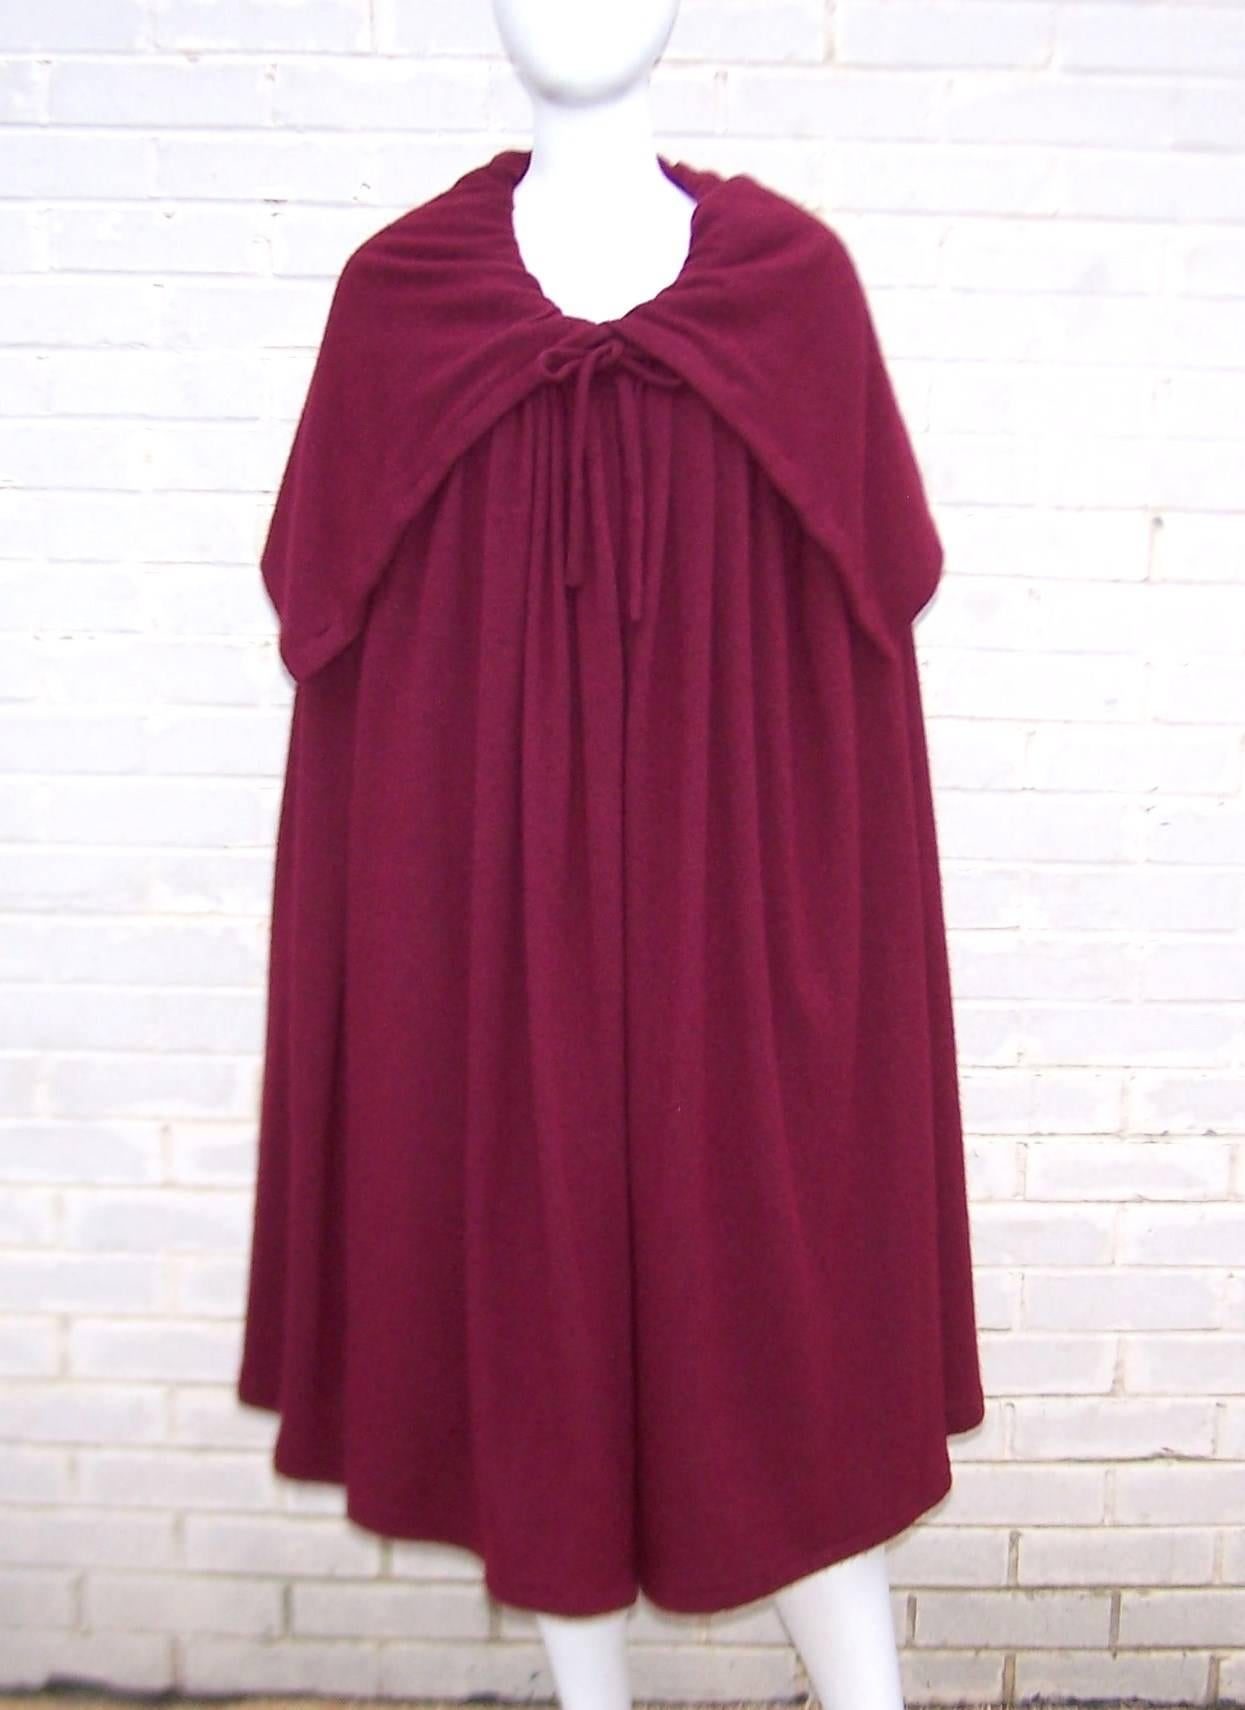 Oh the beautiful drama of a voluminous cape!  Especially when the cape is designed by Valentino Garavani in an aubergine red angora wool blend that drapes with all the comfort of a cozy wrap.  The cape ties at the neckline and buttons on the